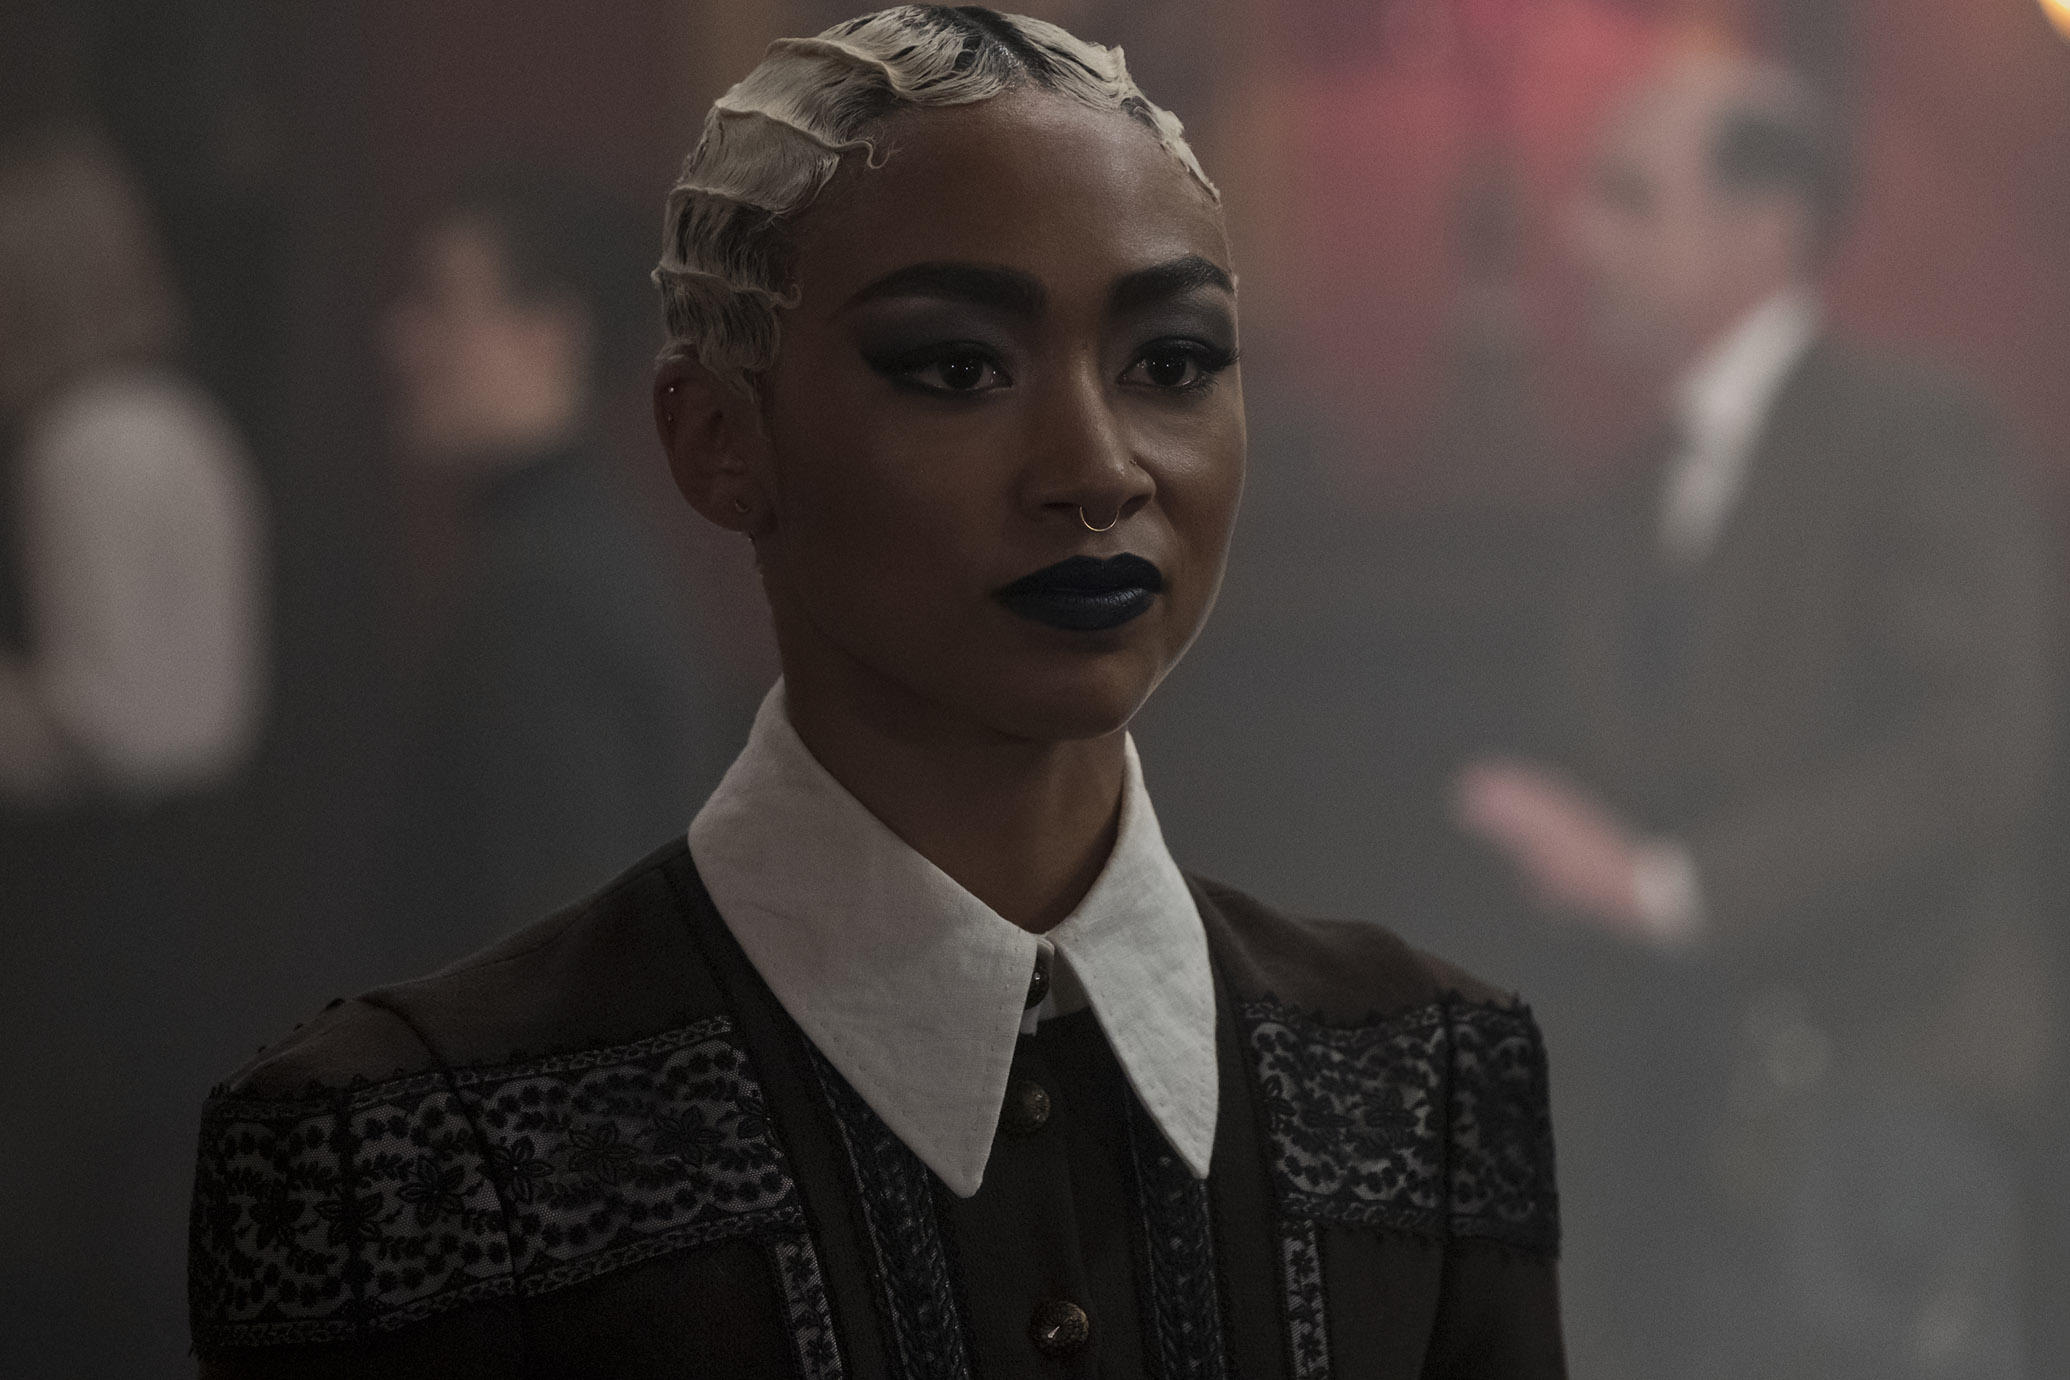 Tati Gabrielle of The Chilling Adventures of Sabrina Wore Two